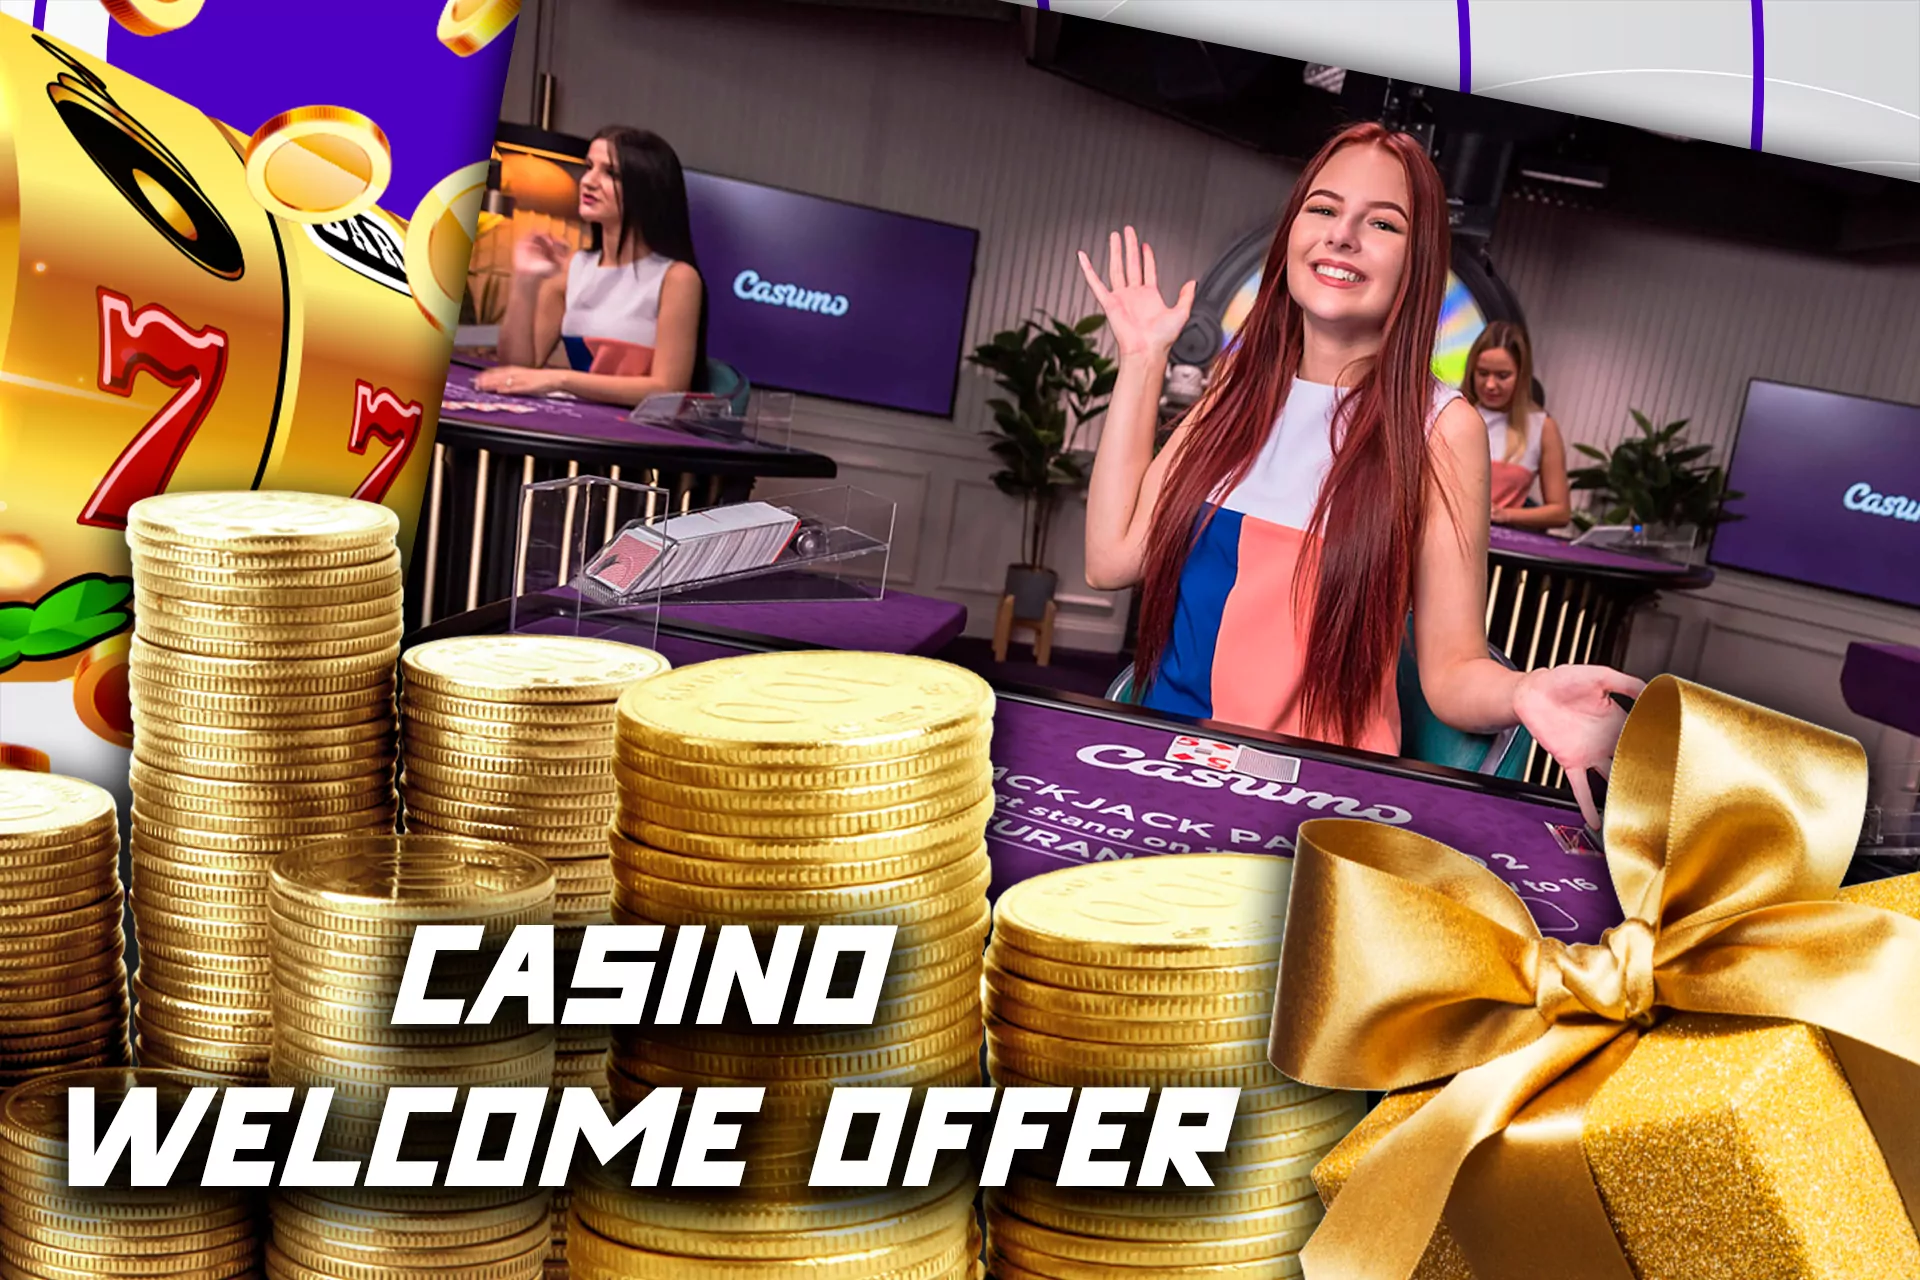 For Casino players, there is another bonus offer you can get during registration.